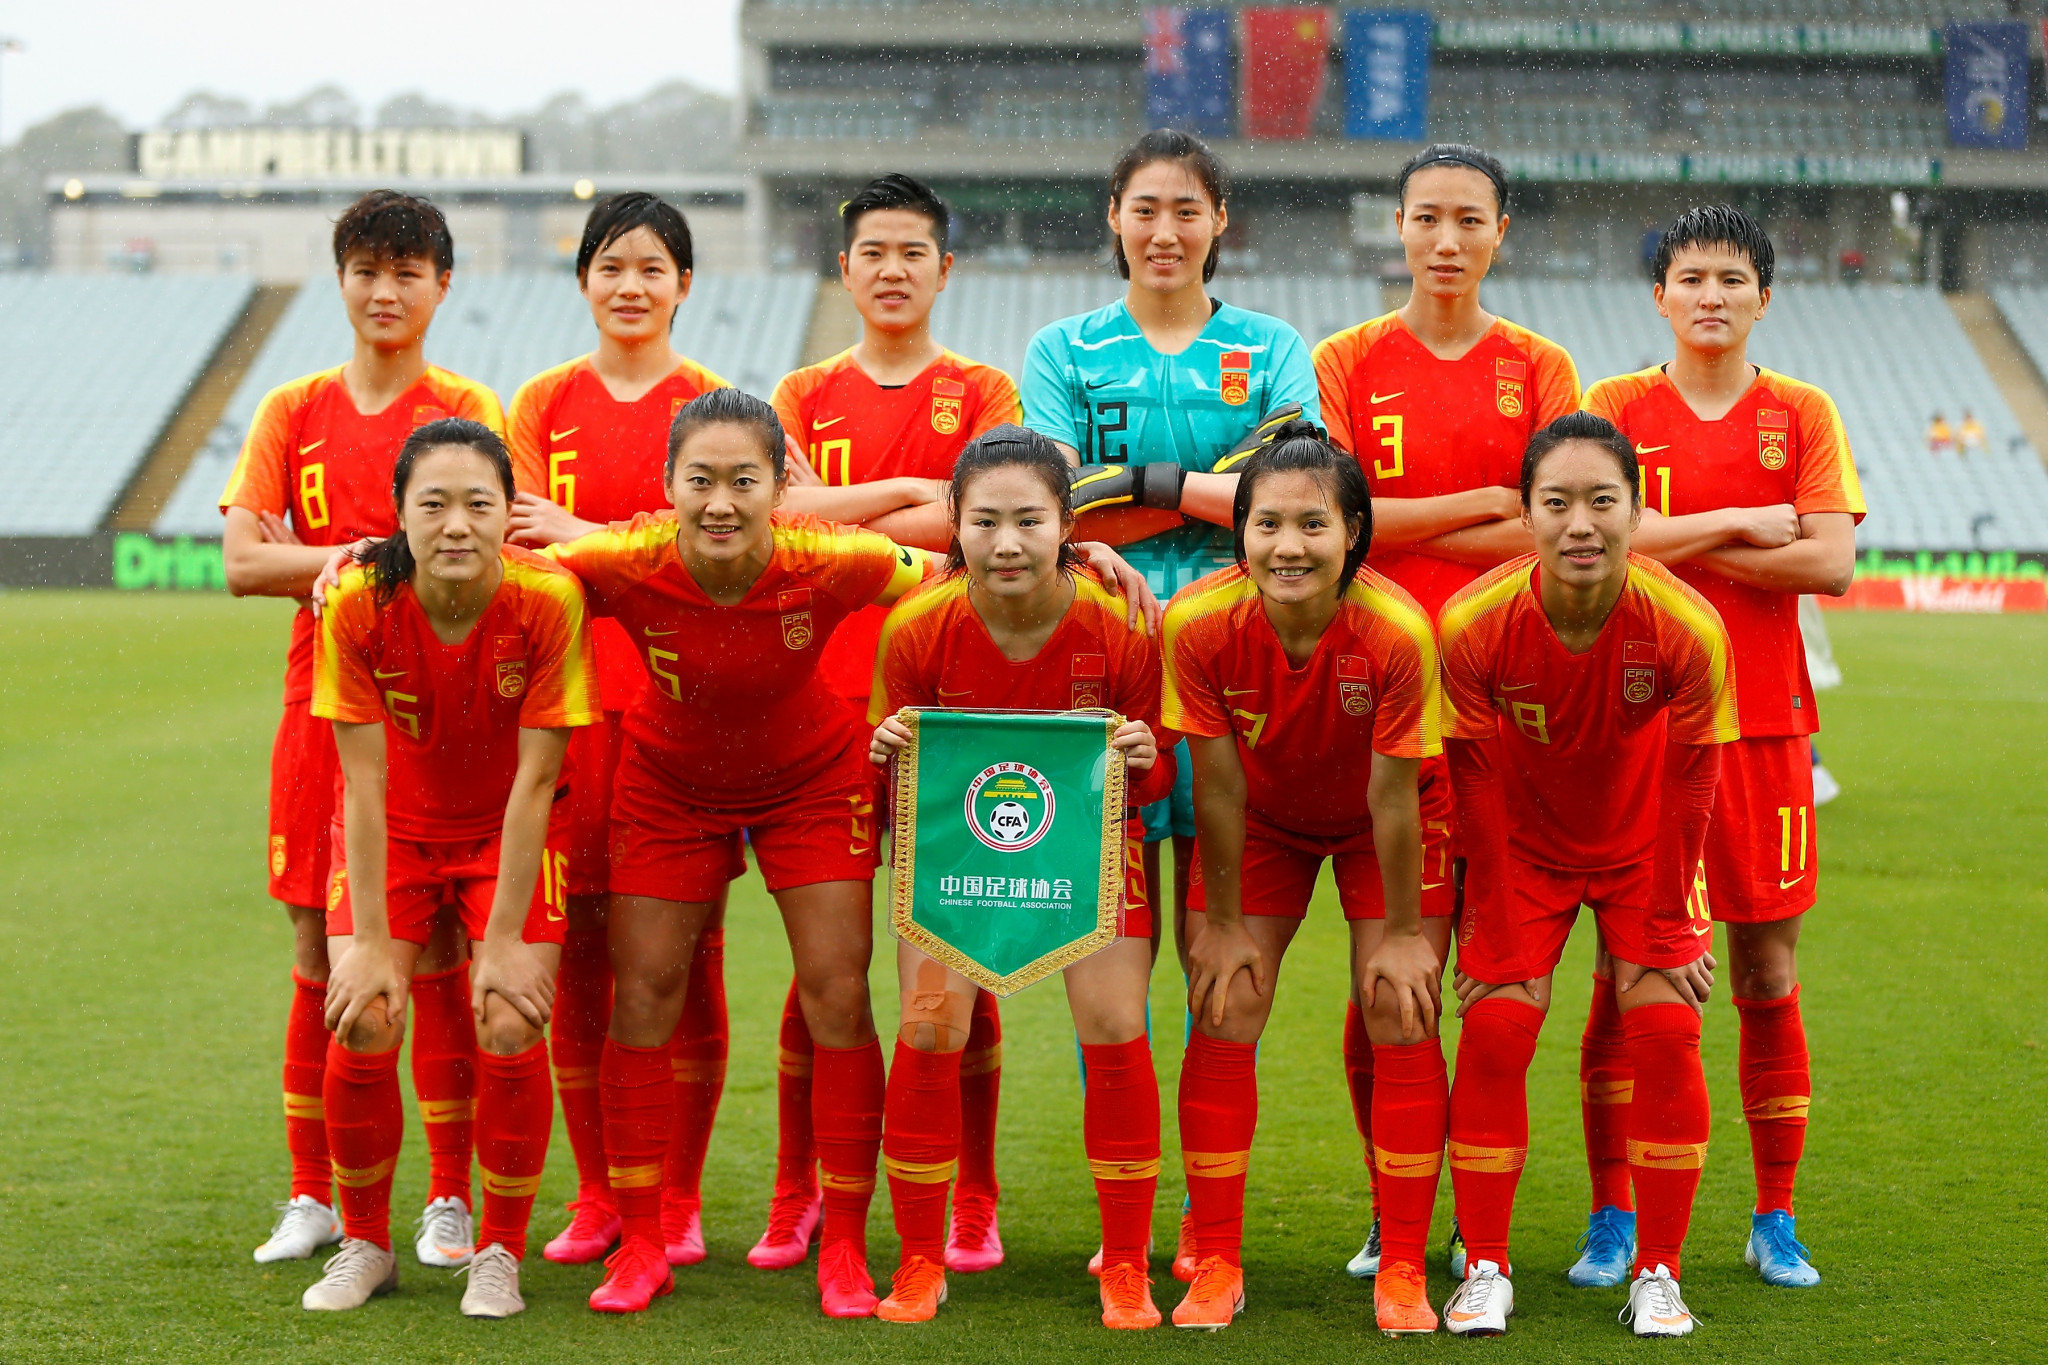 China began their campaign to qualify for Tokyo 2020 with a win against Thailand ©Getty Images